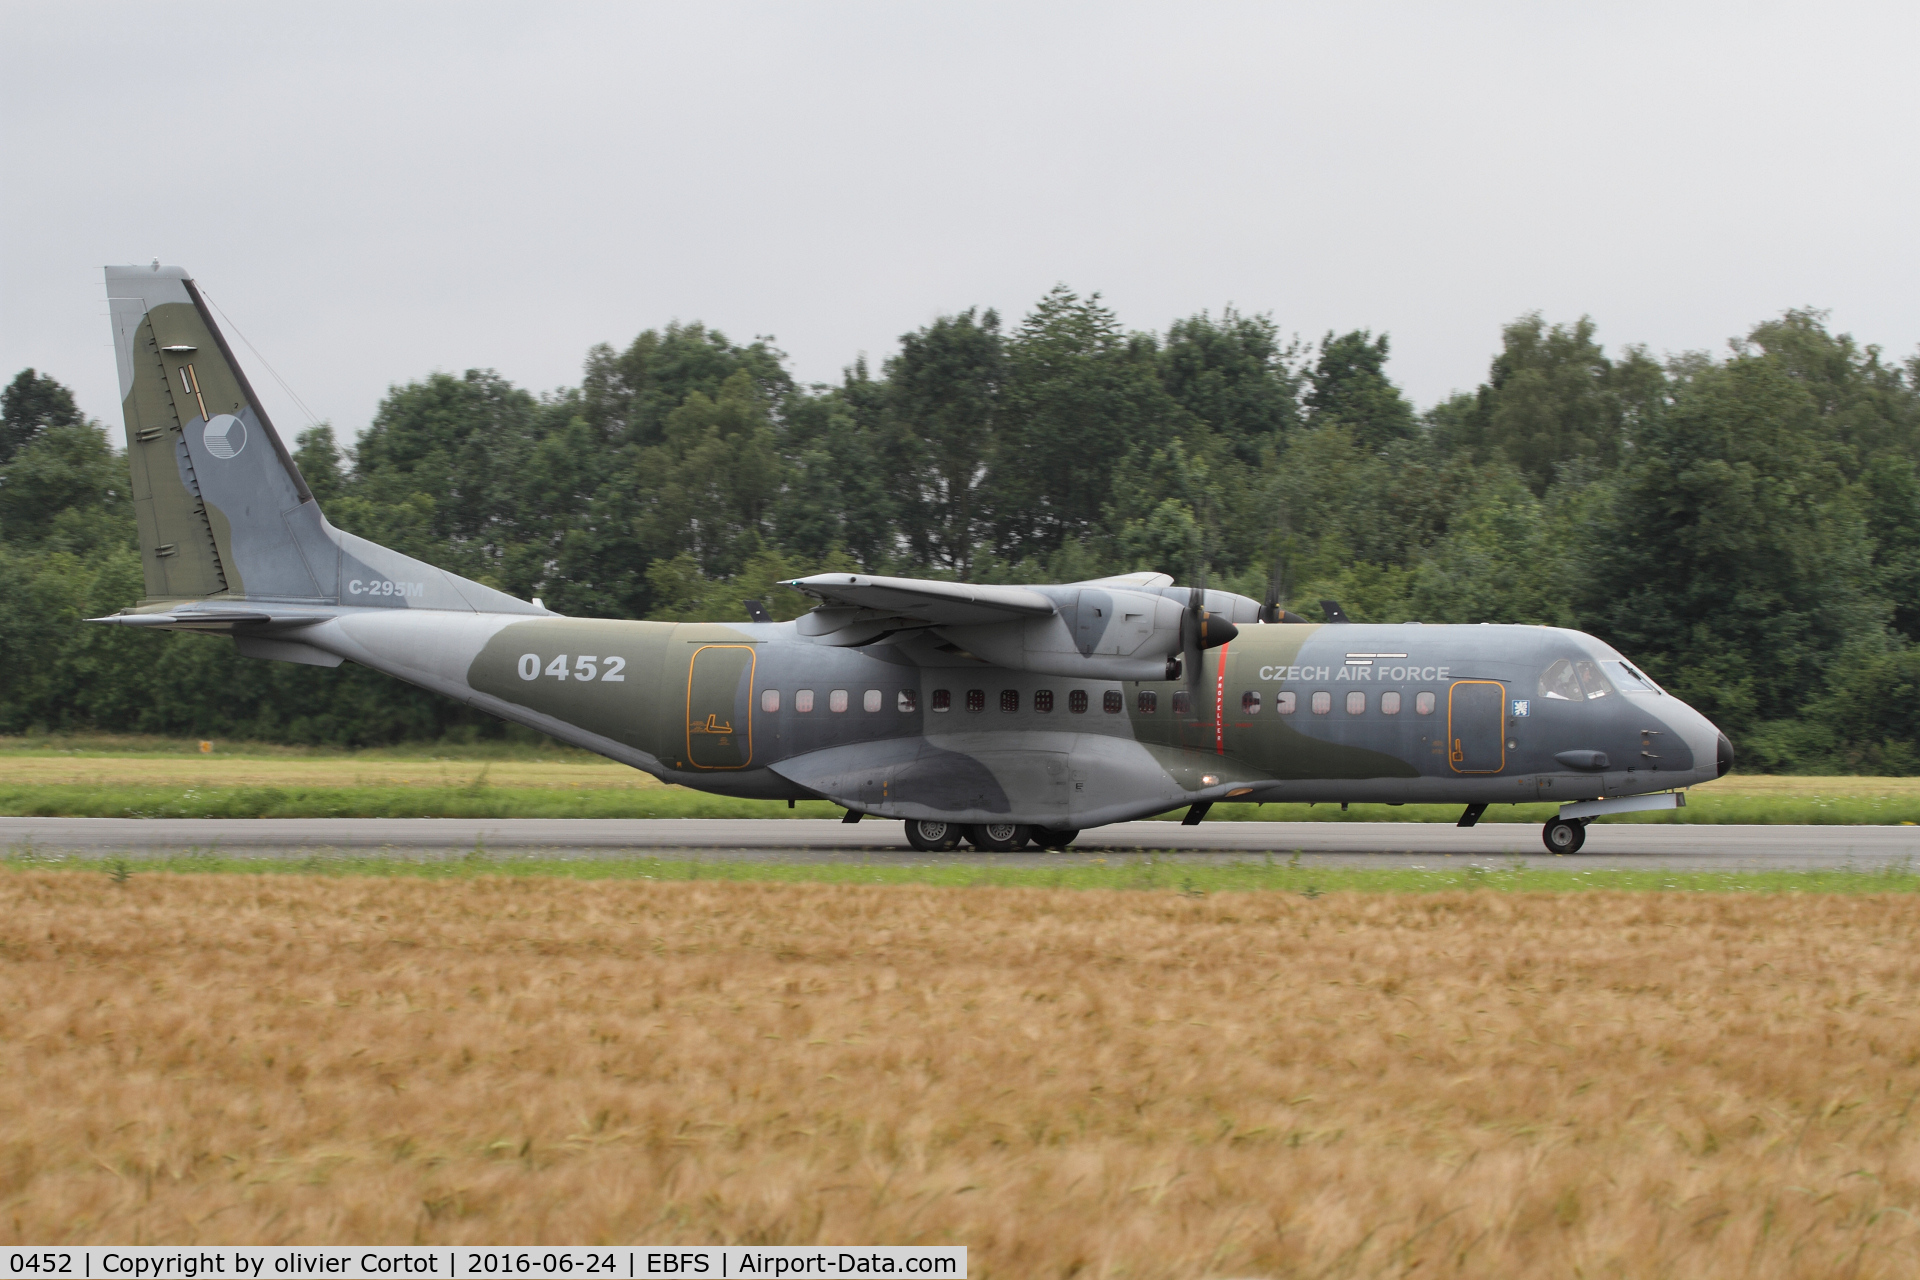 0452, 2009 CASA C-295M C/N S-062, about to take off from Florennes